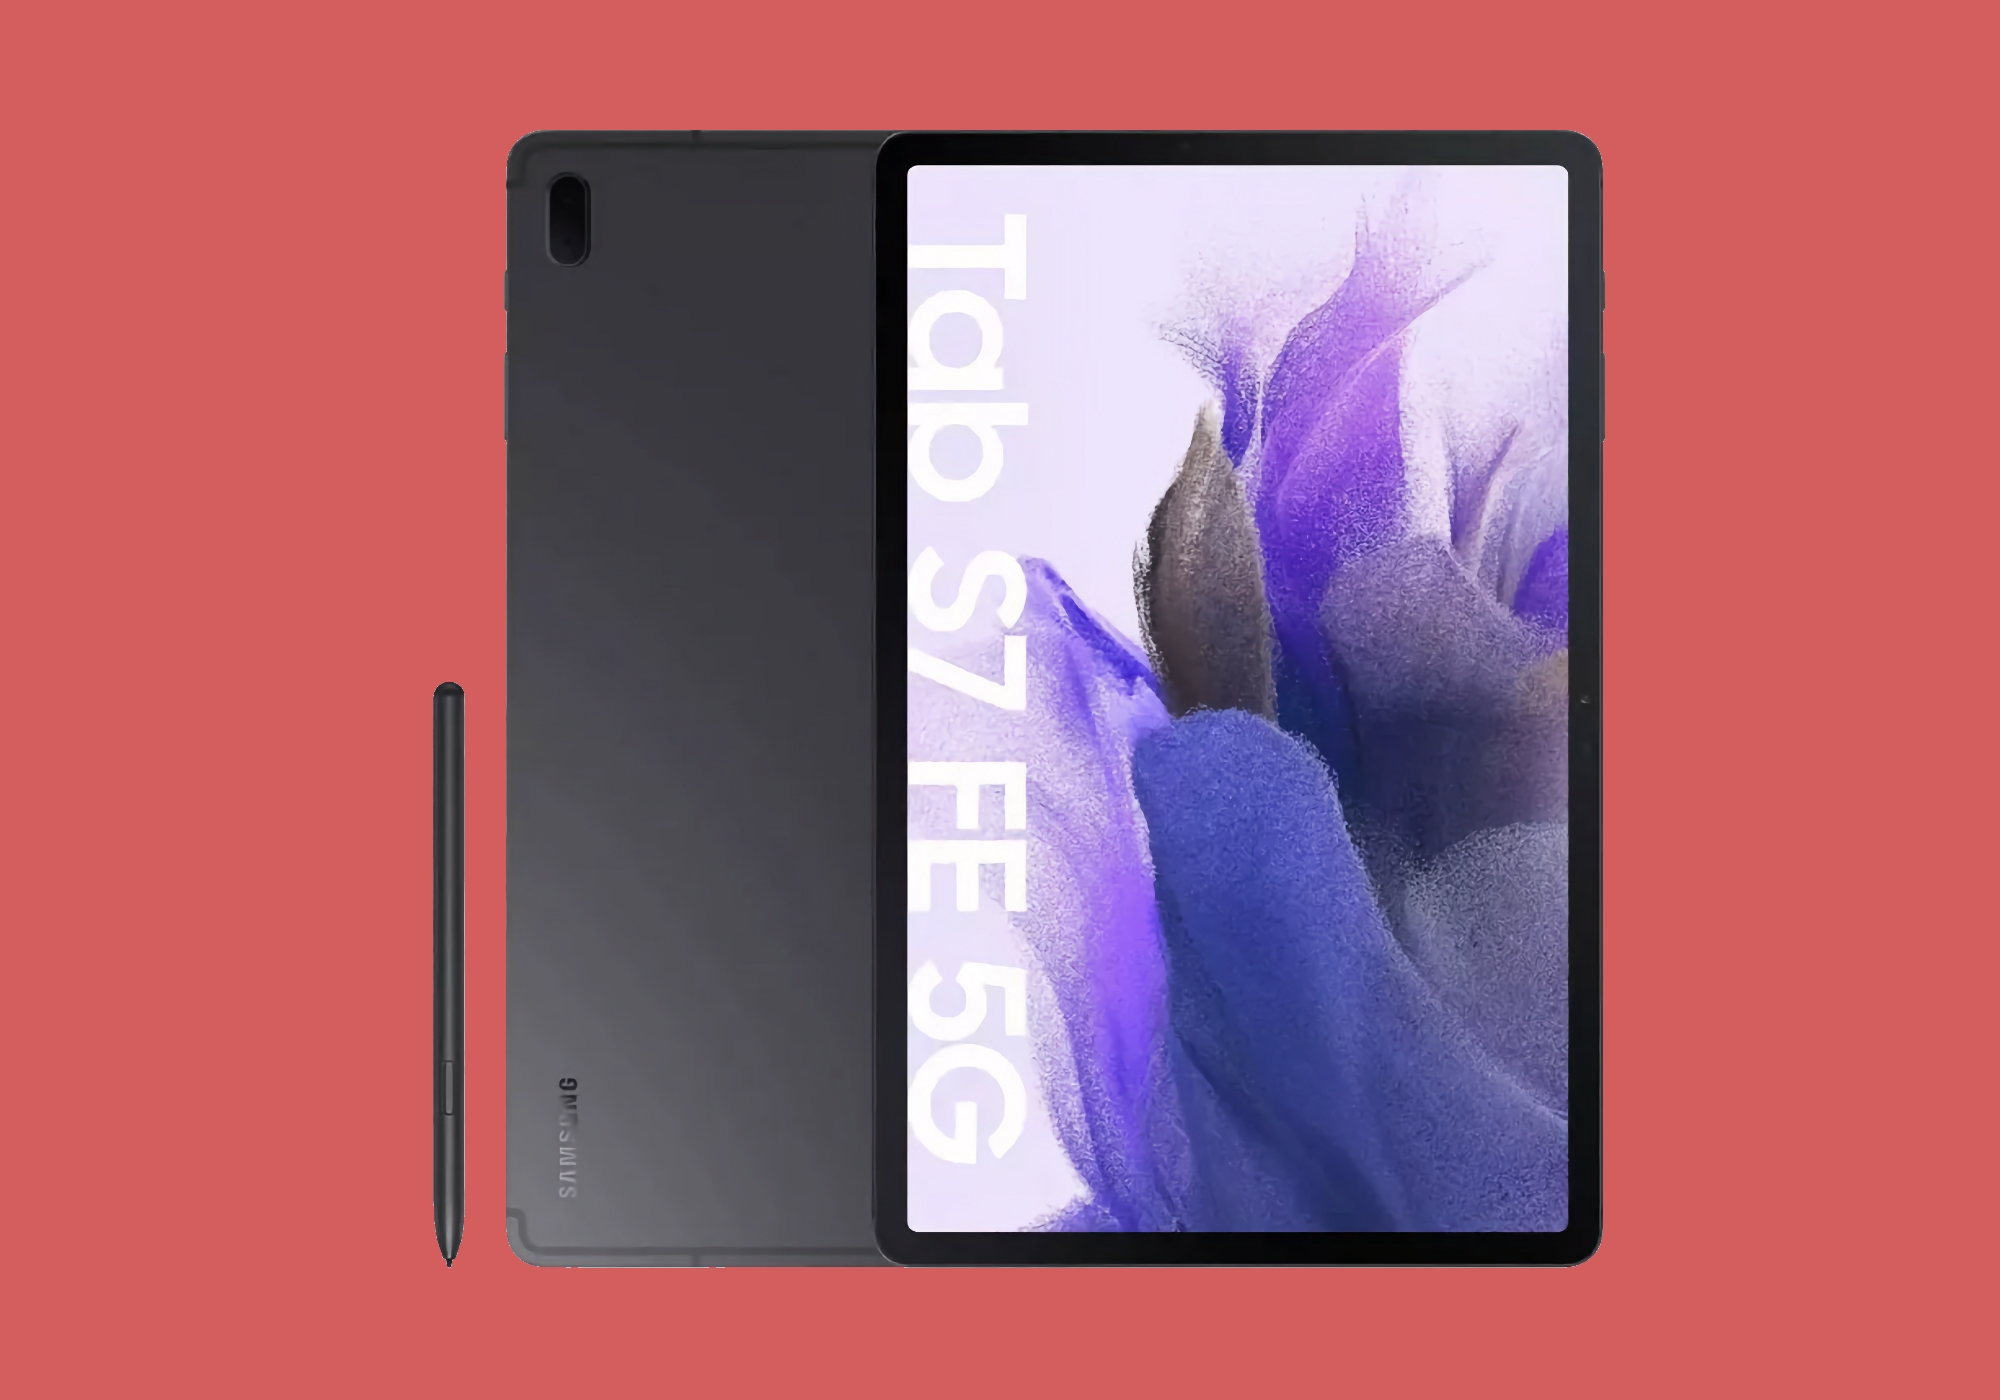 Samsung Galaxy Tab S7 FE with 12.4" screen and stylus included can be bought on Amazon with a discount of up to $198